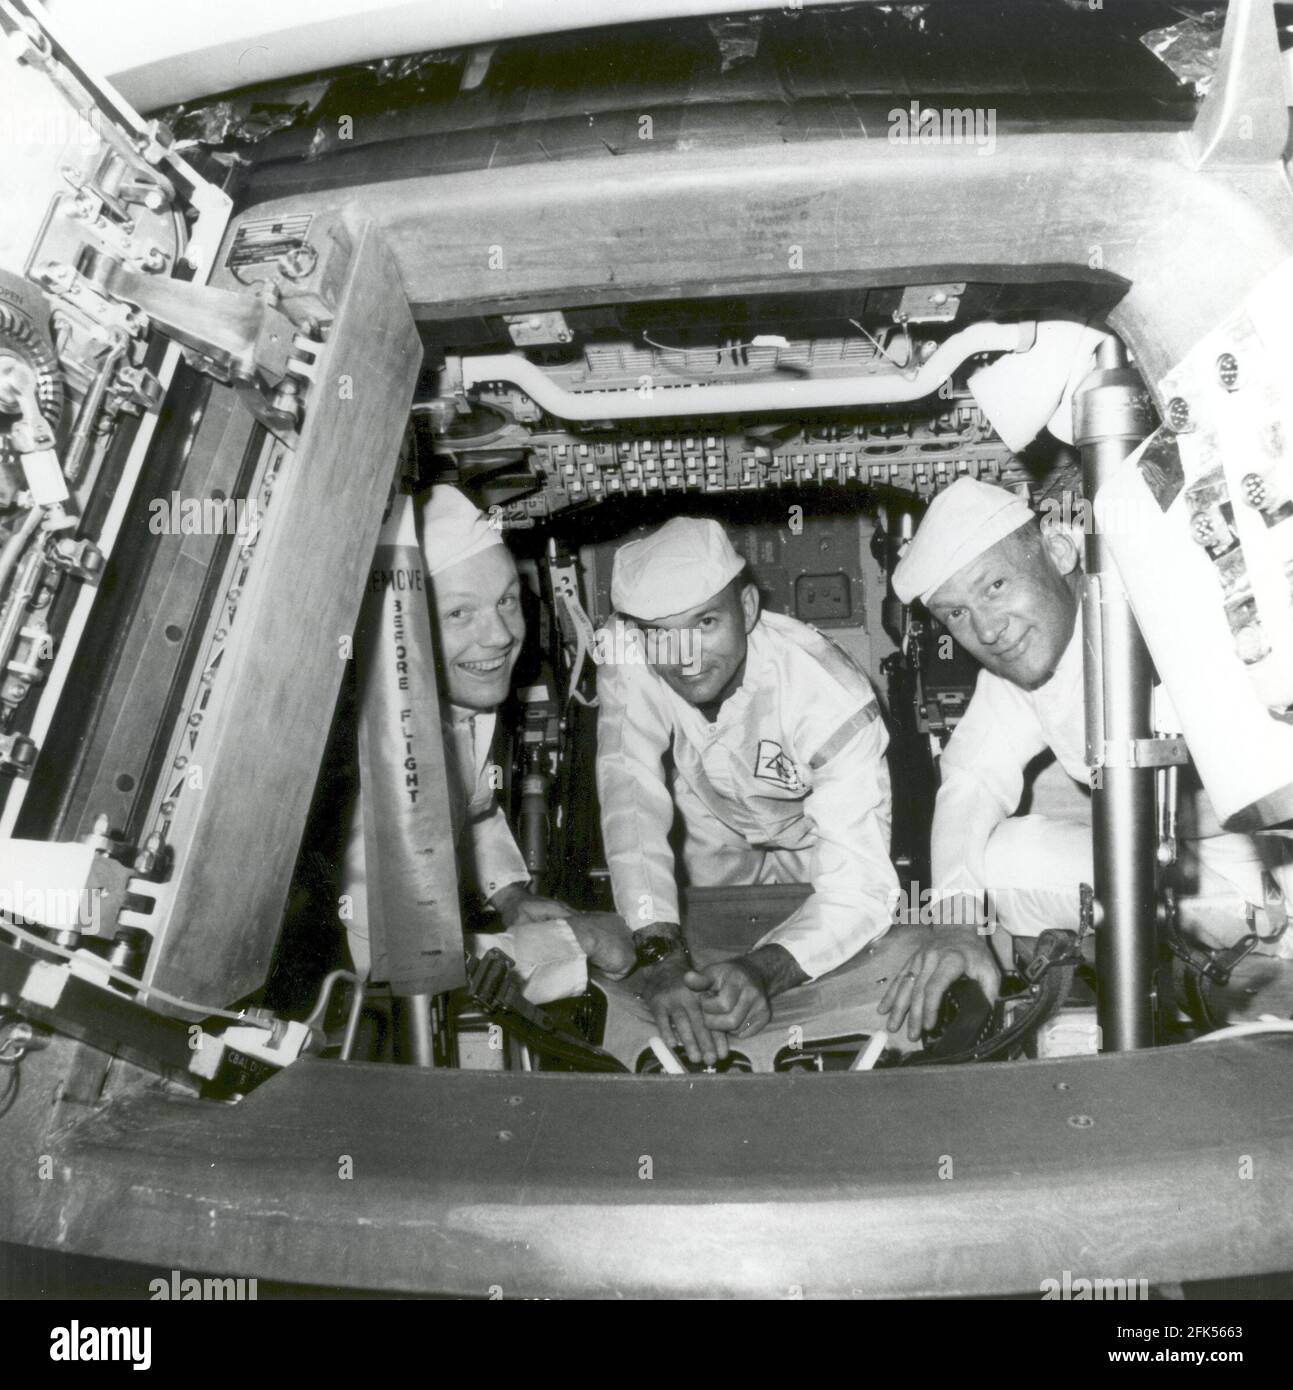 Cape Canaveral, FL - (FILE) -- The Apollo 11 crew conducting a crew compartment fit and functional check, of the equipment and storage locations, in their command module on June 10, 1969. Peering from the hatch are from left, Neil Armstrong, commander; Michael Collins, command module pilot; and Buzz Aldrin, lunar module pilot. Armstrong and Aldrin later conducted a similar check aboard the lunar module, which carried them down to the lunar surface on July 20, 1969.Credit: NASA via CNP /MediaPunch Stock Photo